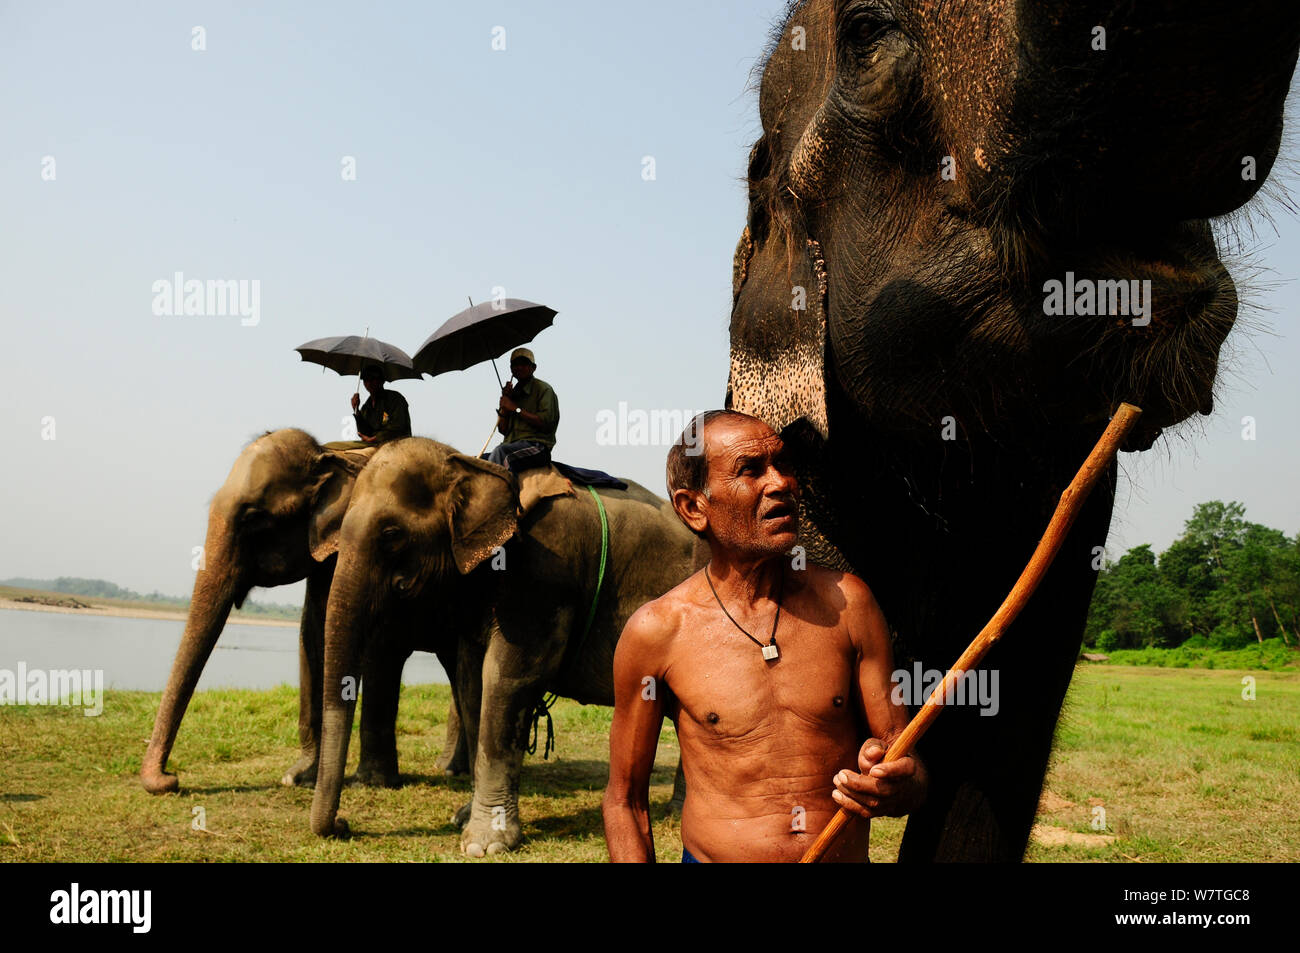 Domestic Asian elephants (Elephas maximas) used for riding safaris with their keepers, Royal Chitwan National Park, Nepal. Stock Photo